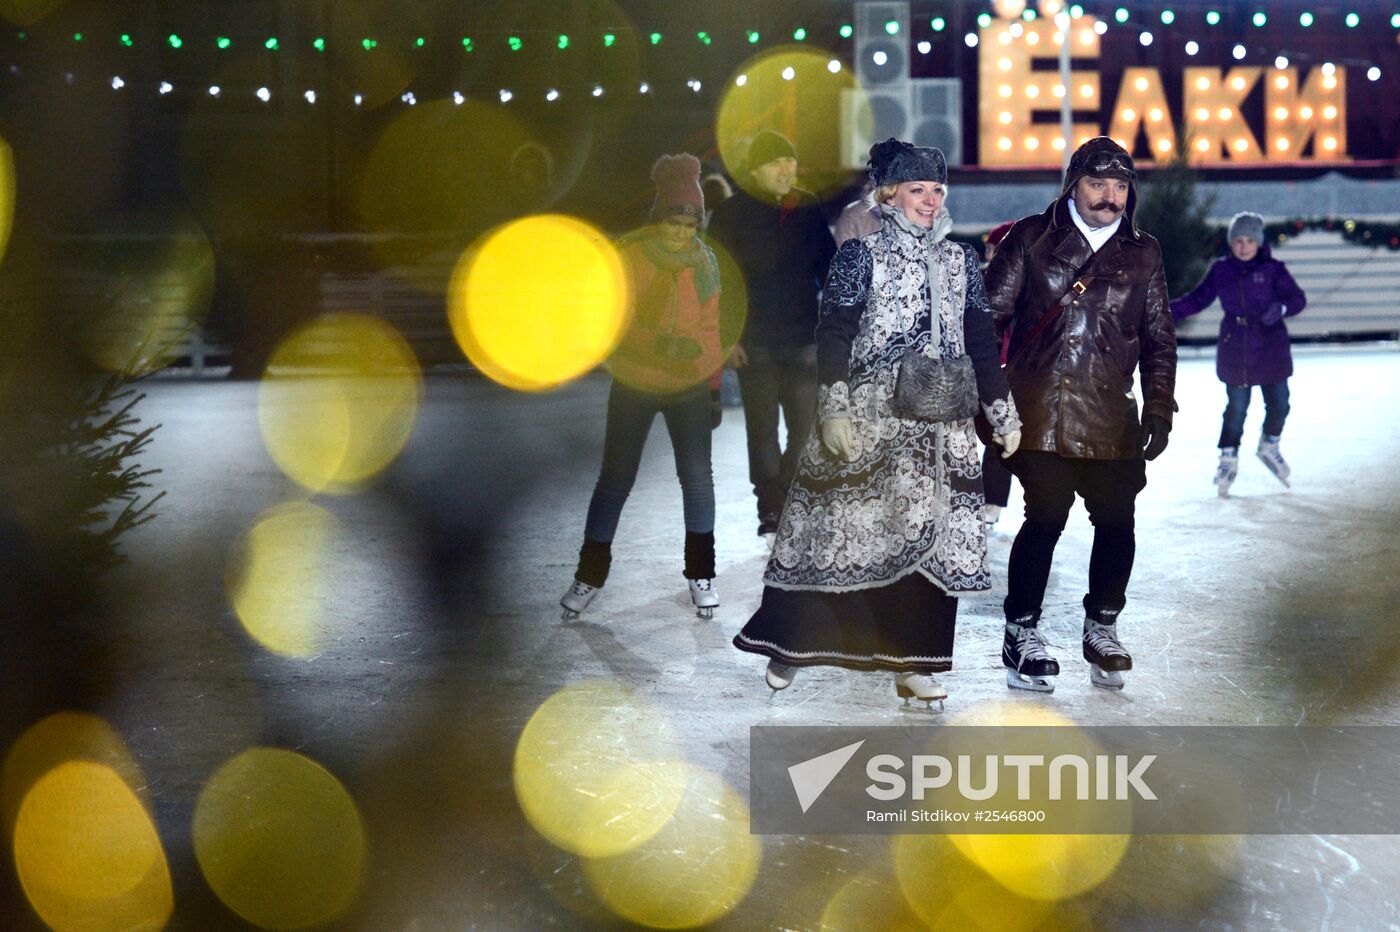 Early 20th century style skating rink opens at Moscow's Poklonnaya Hill